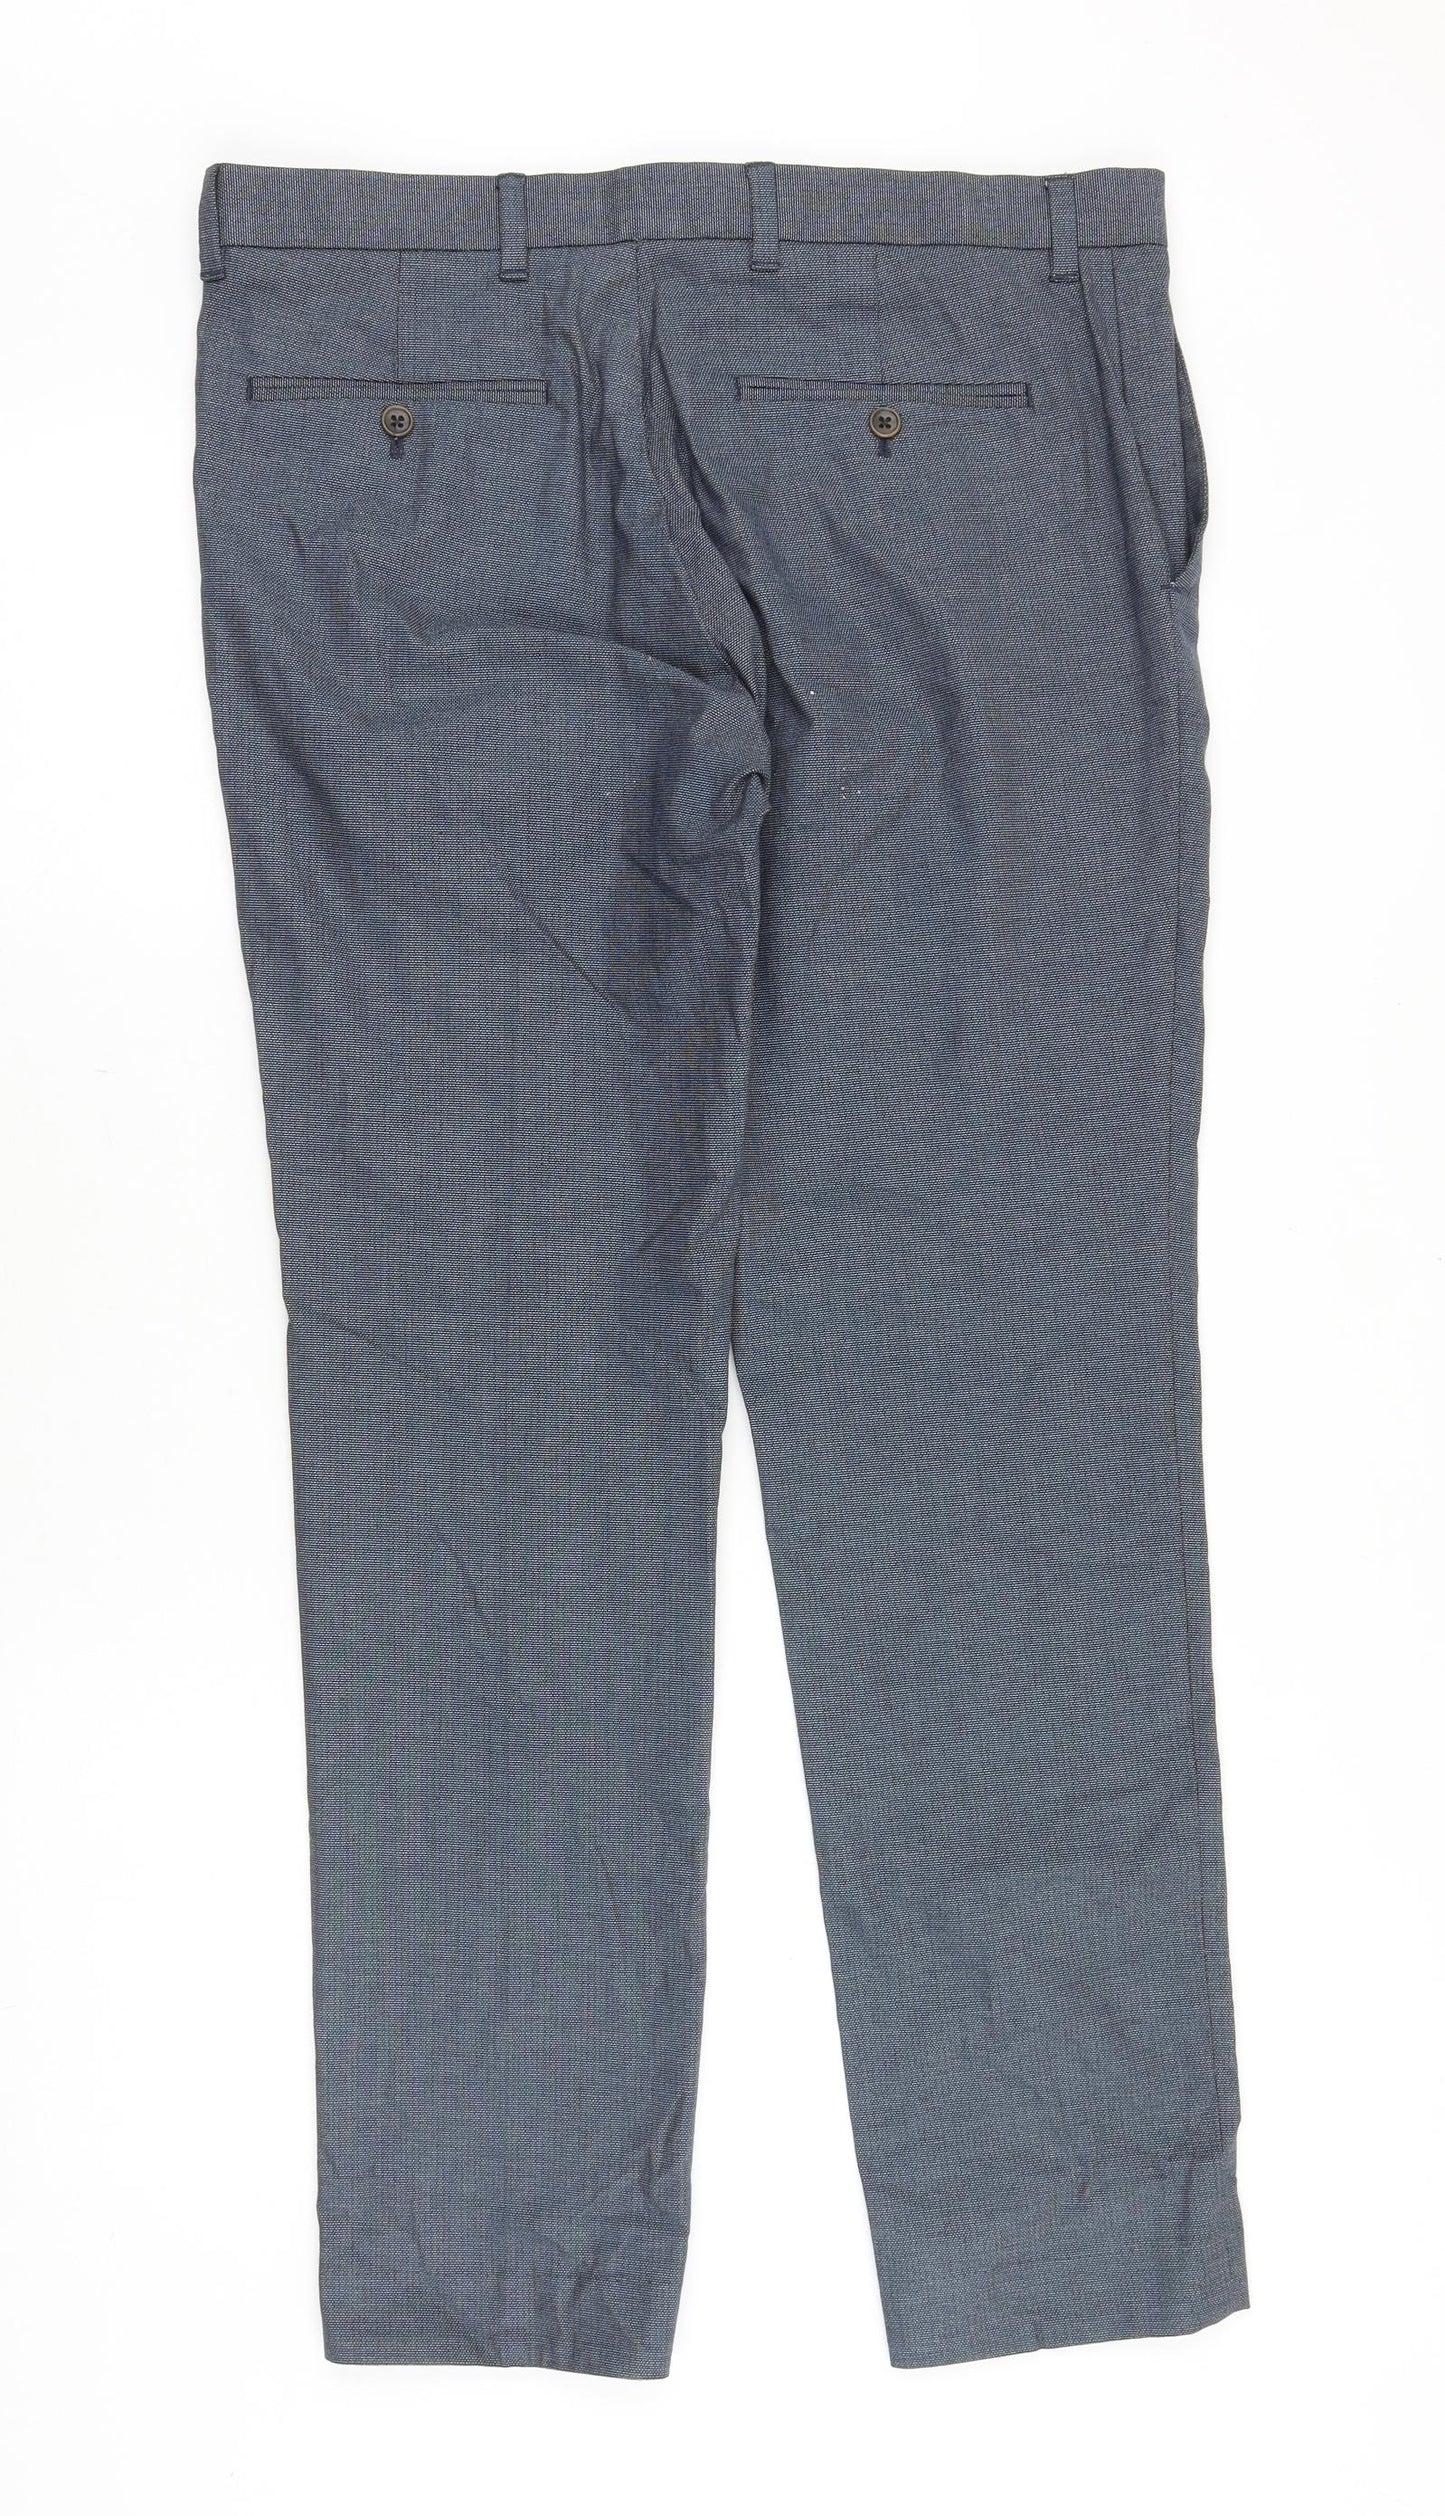 NEXT Mens Grey Polyester Trousers Size 34 in Regular Zip